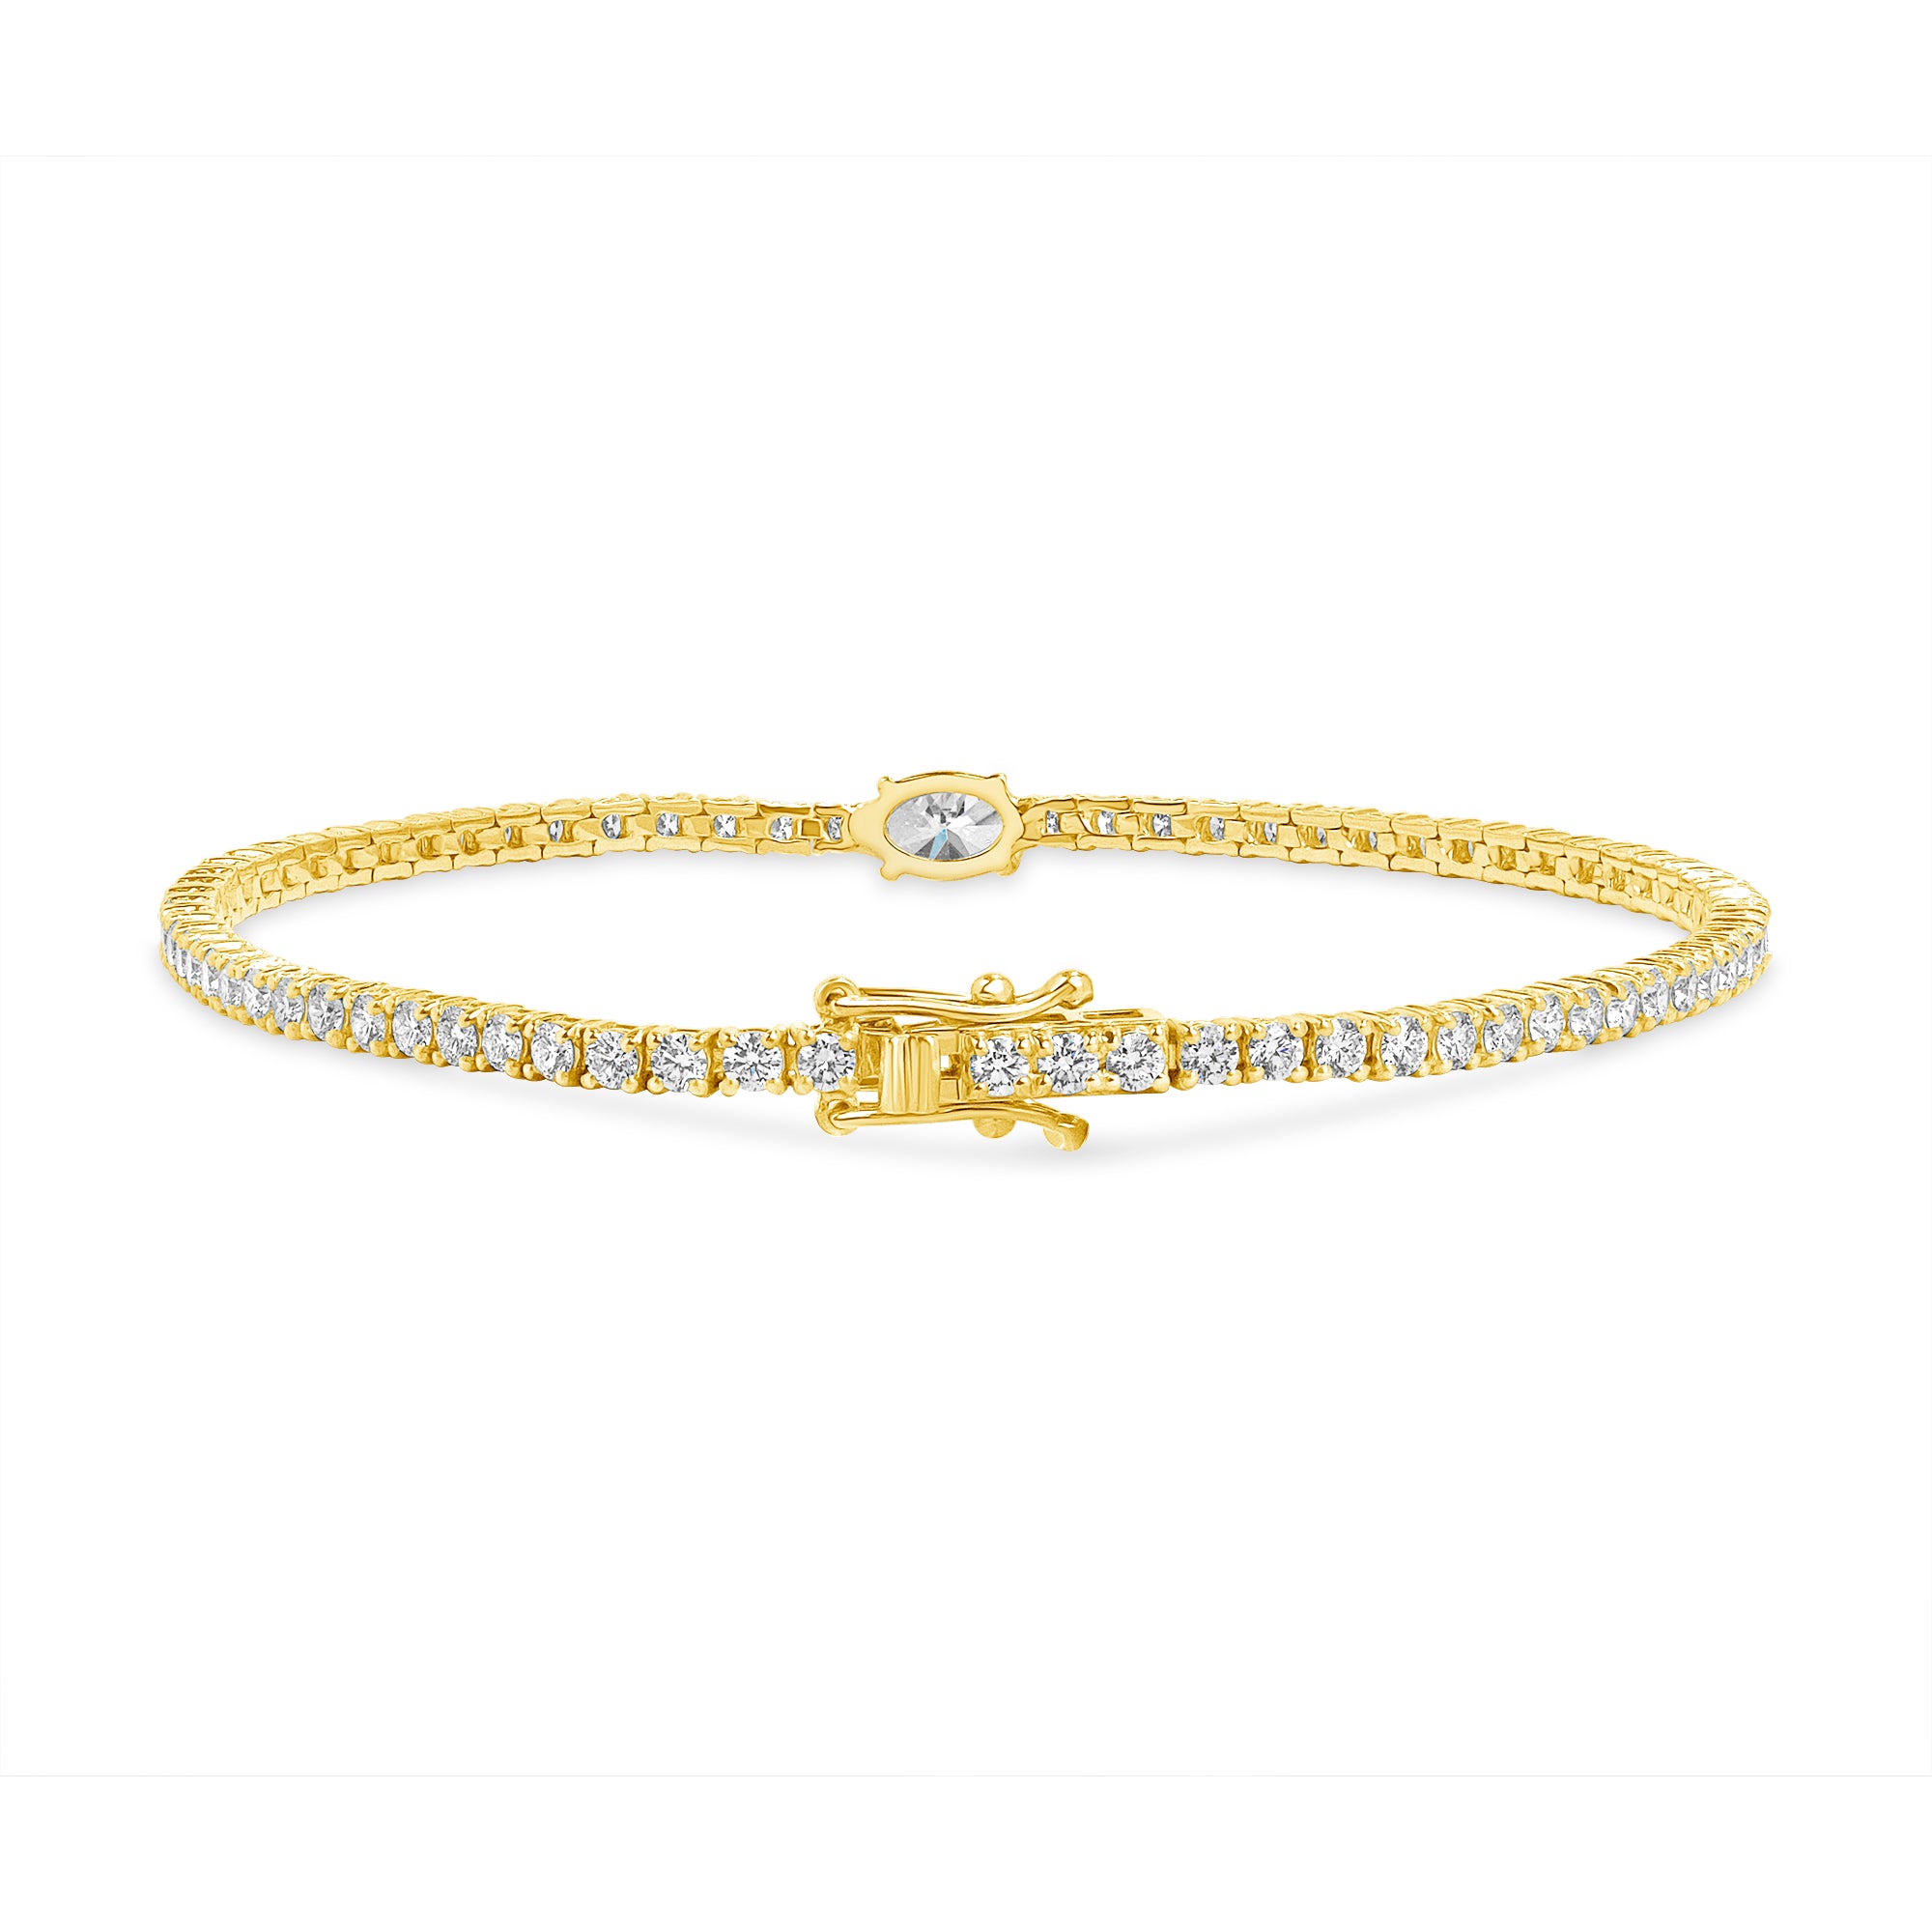 2.87ctw Oval Cut Diamond Tennis Bracelet With Center Stone in 18K Yellow Gold